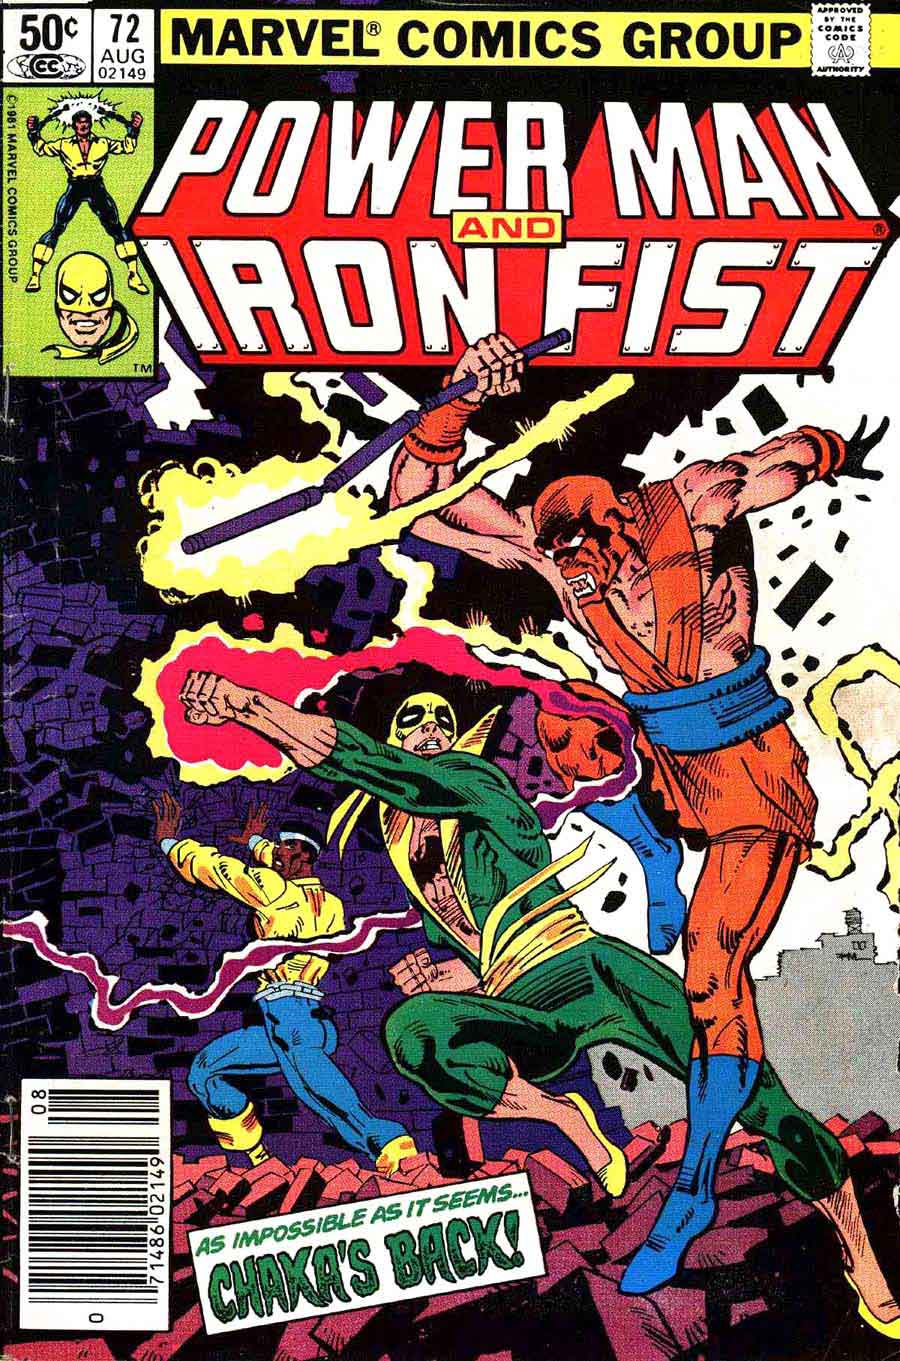 Power Man and Iron Fist #72 marvel 1980s comic book cover art by Frank Miller